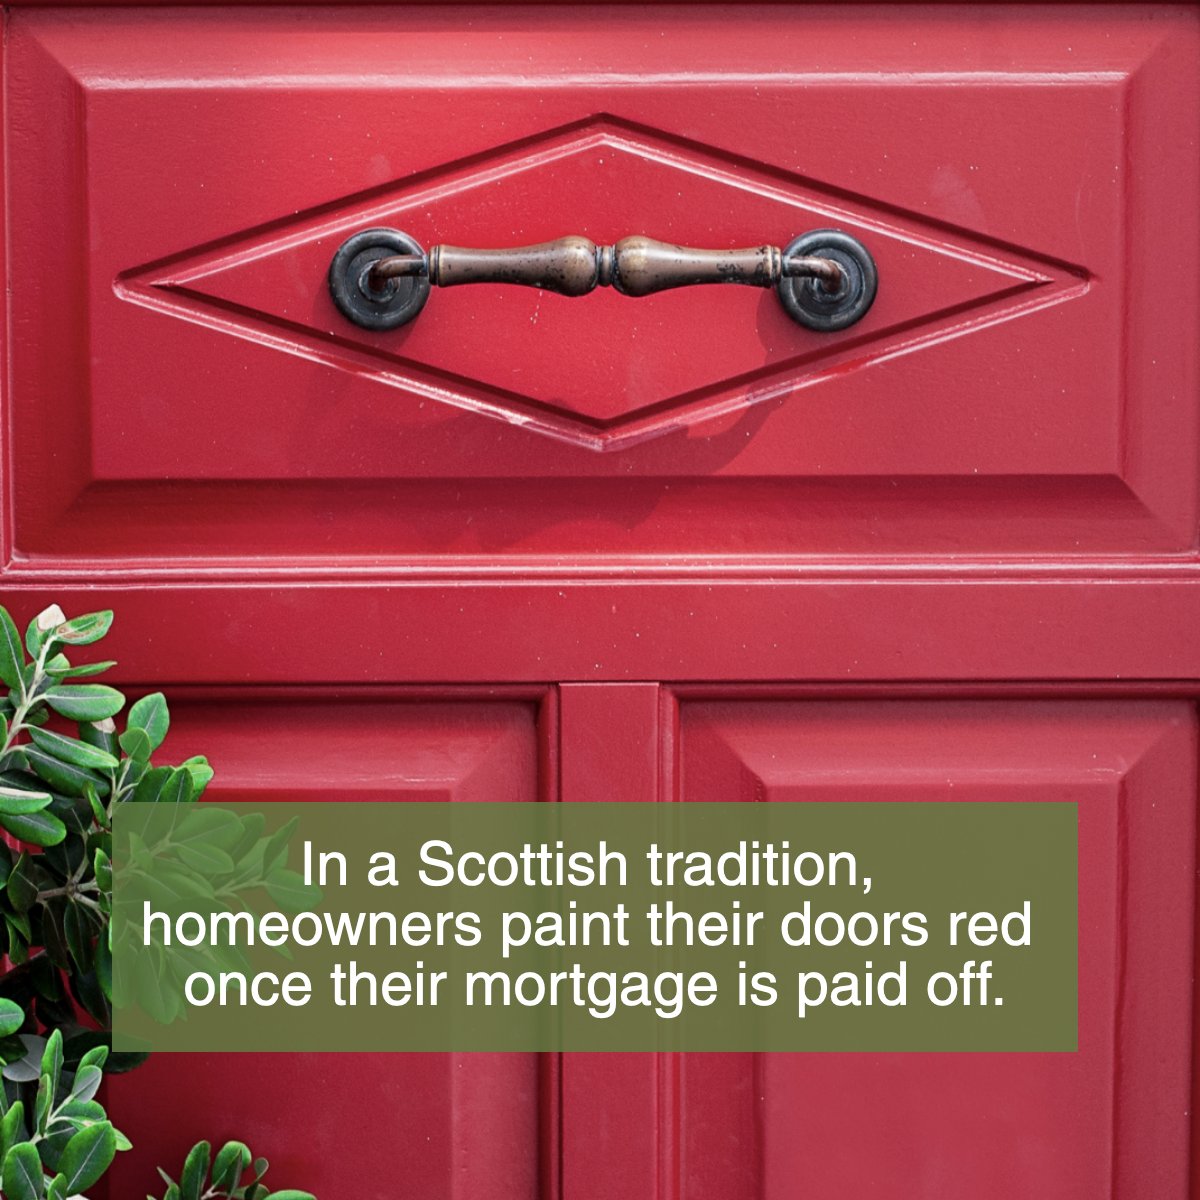 Is this a tradition you would like to implement? What color should we paint our doors? Let us know in the comments! 💭 #funfacts #tradition #mortgage #frontdoor #realestatefact